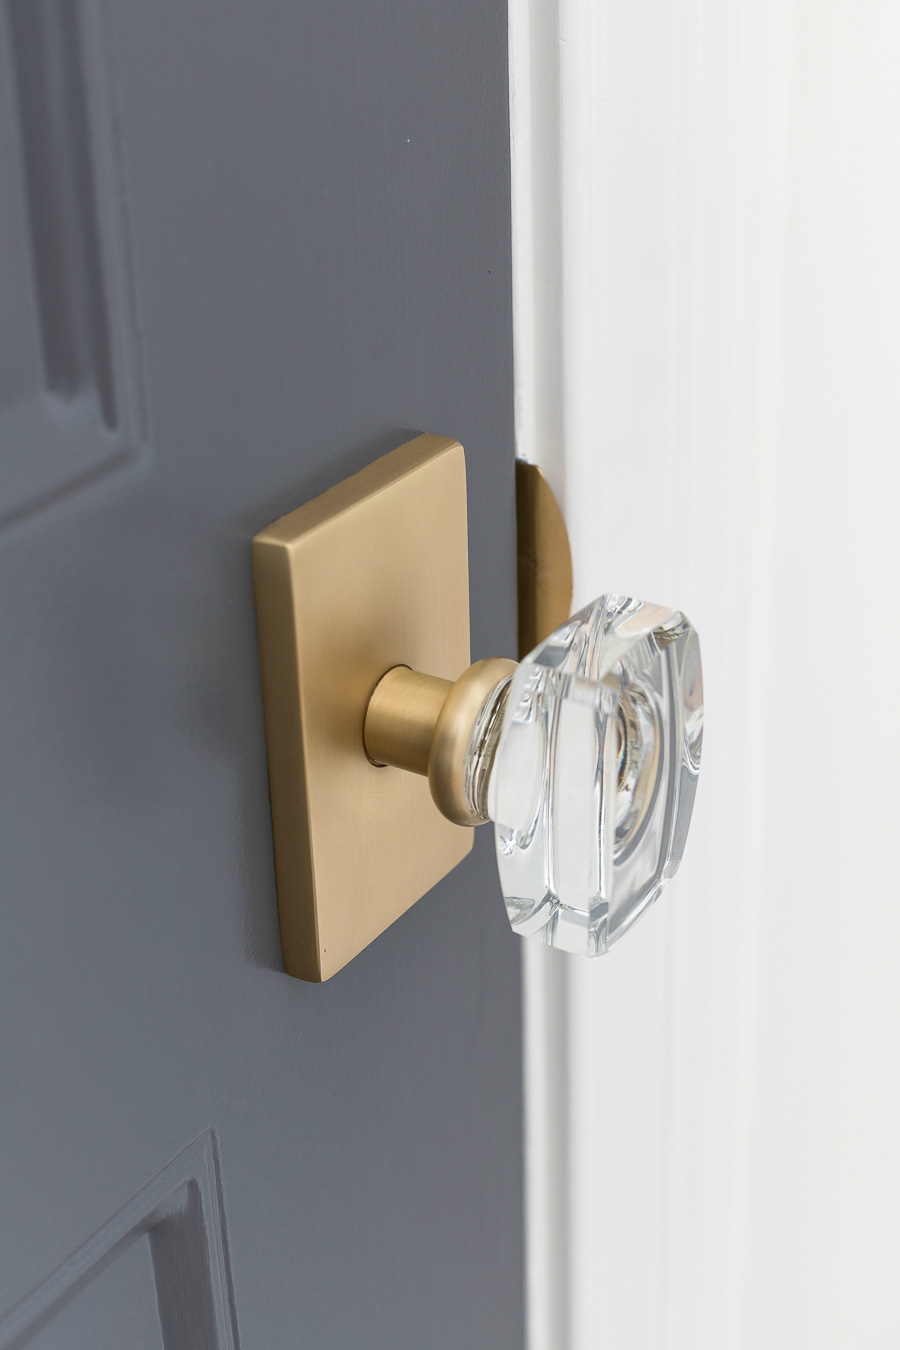 GORGEOUS door hardware! Love the combination of the crystal knob with the rectangular brass rosette! Source linked in post!